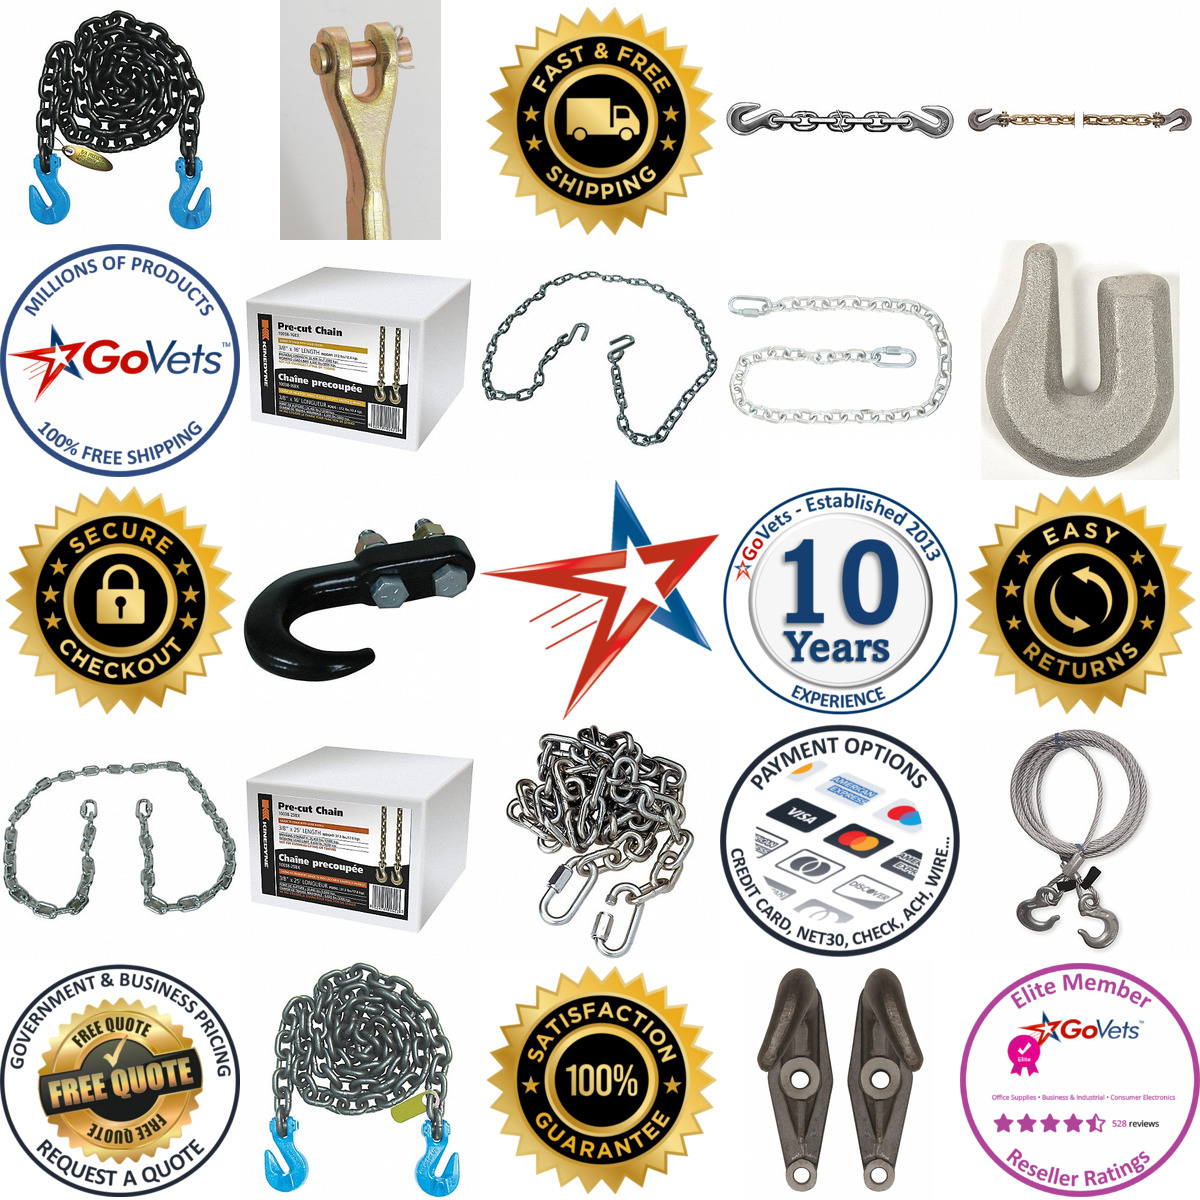 A selection of Towing Chains and Cables products on GoVets